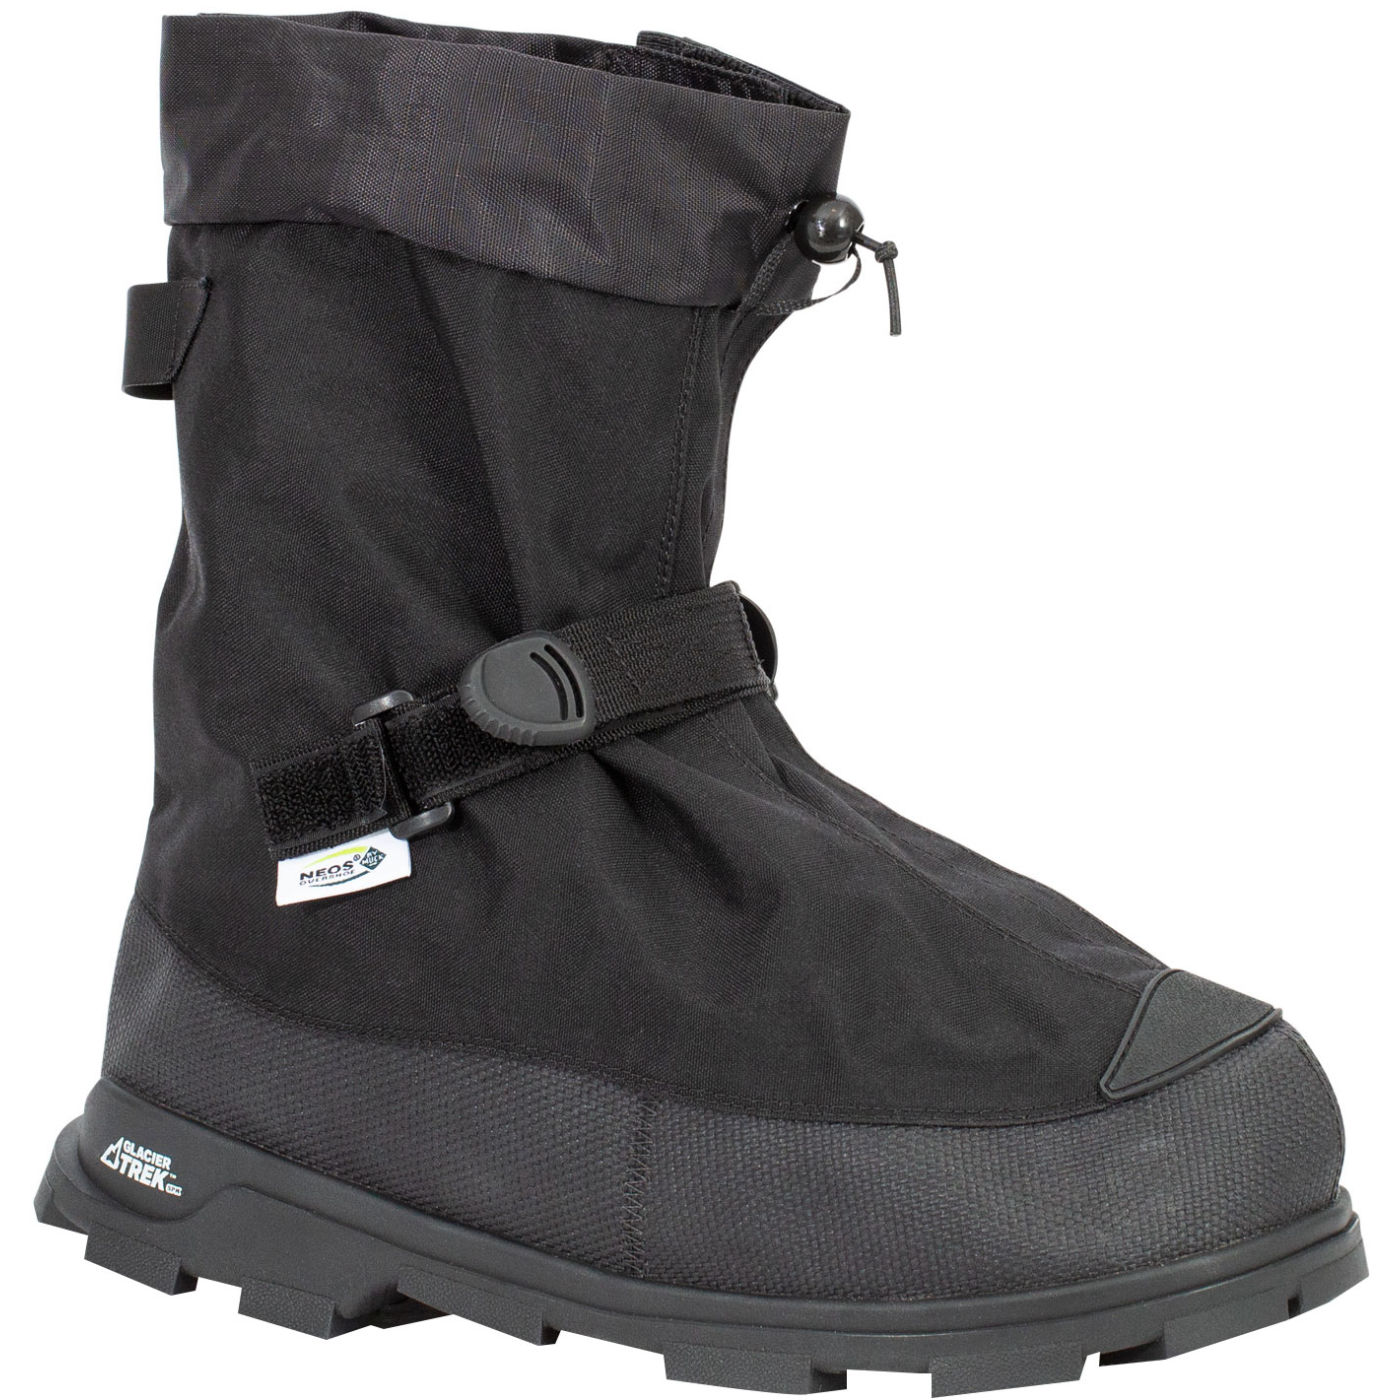 Neos Voyager Overshoe with Heel + Glacier Trek SPK Cleats from Columbia Safety